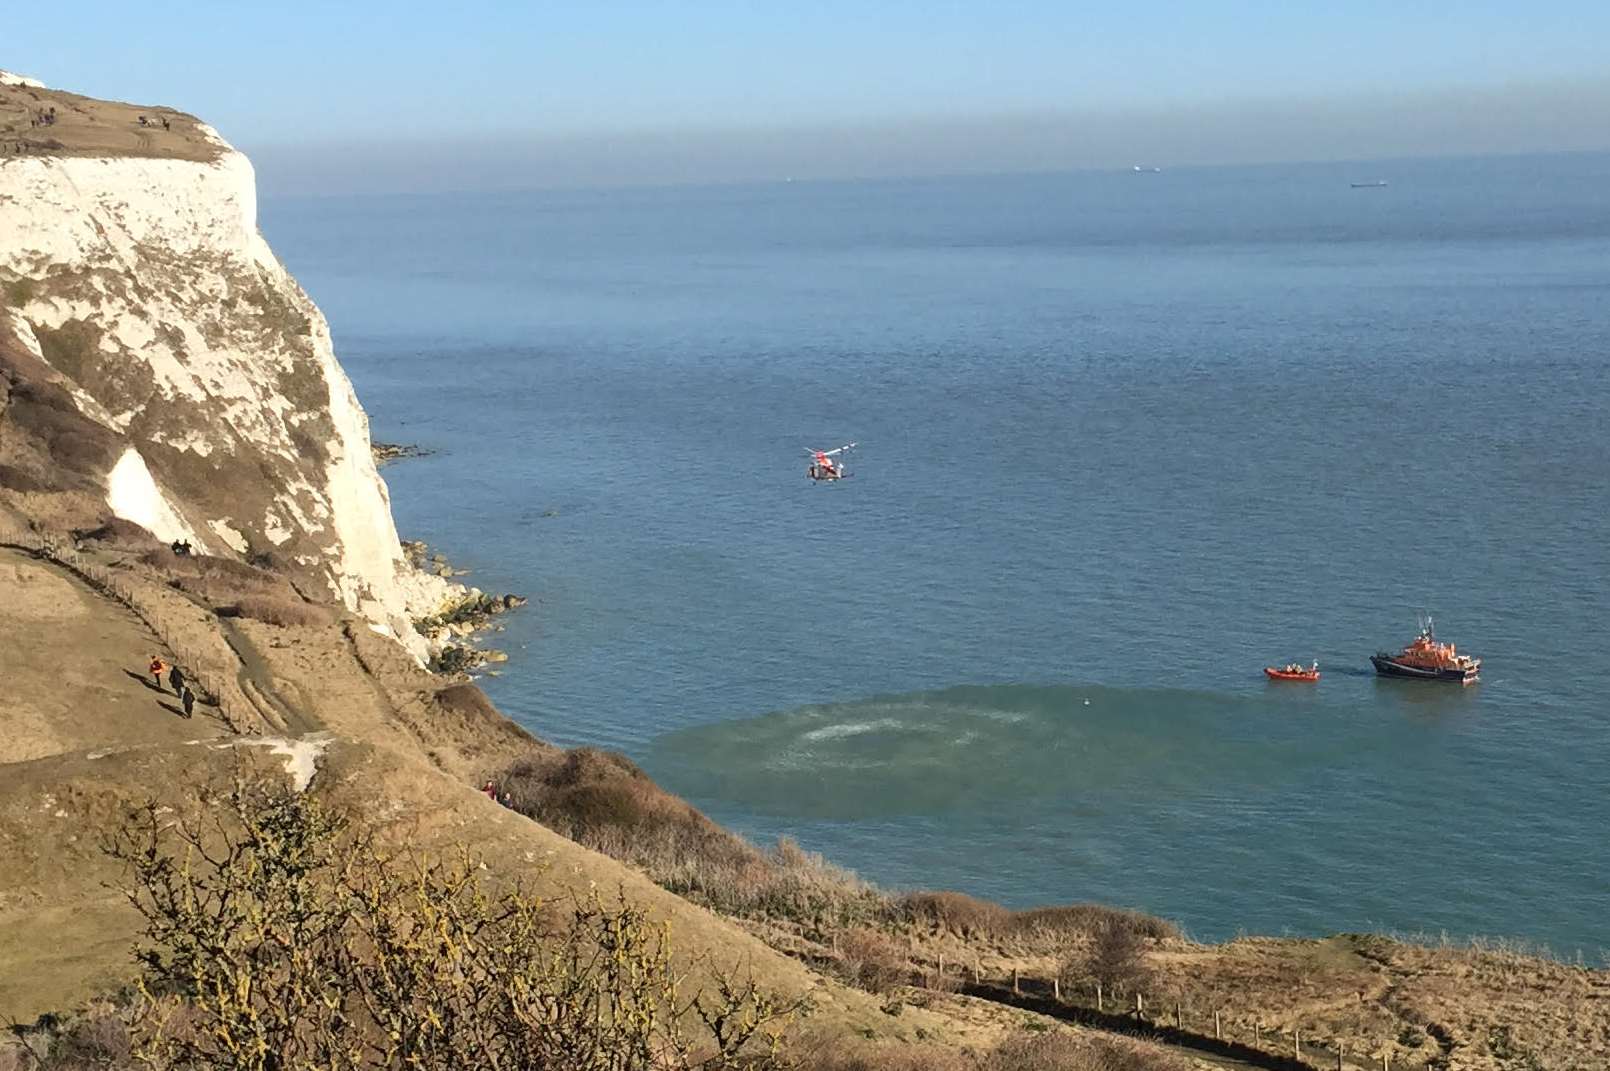 A helicopter and lifeboats seen during yesterday's tragedy. Picture courtesy of Gracie Irvine